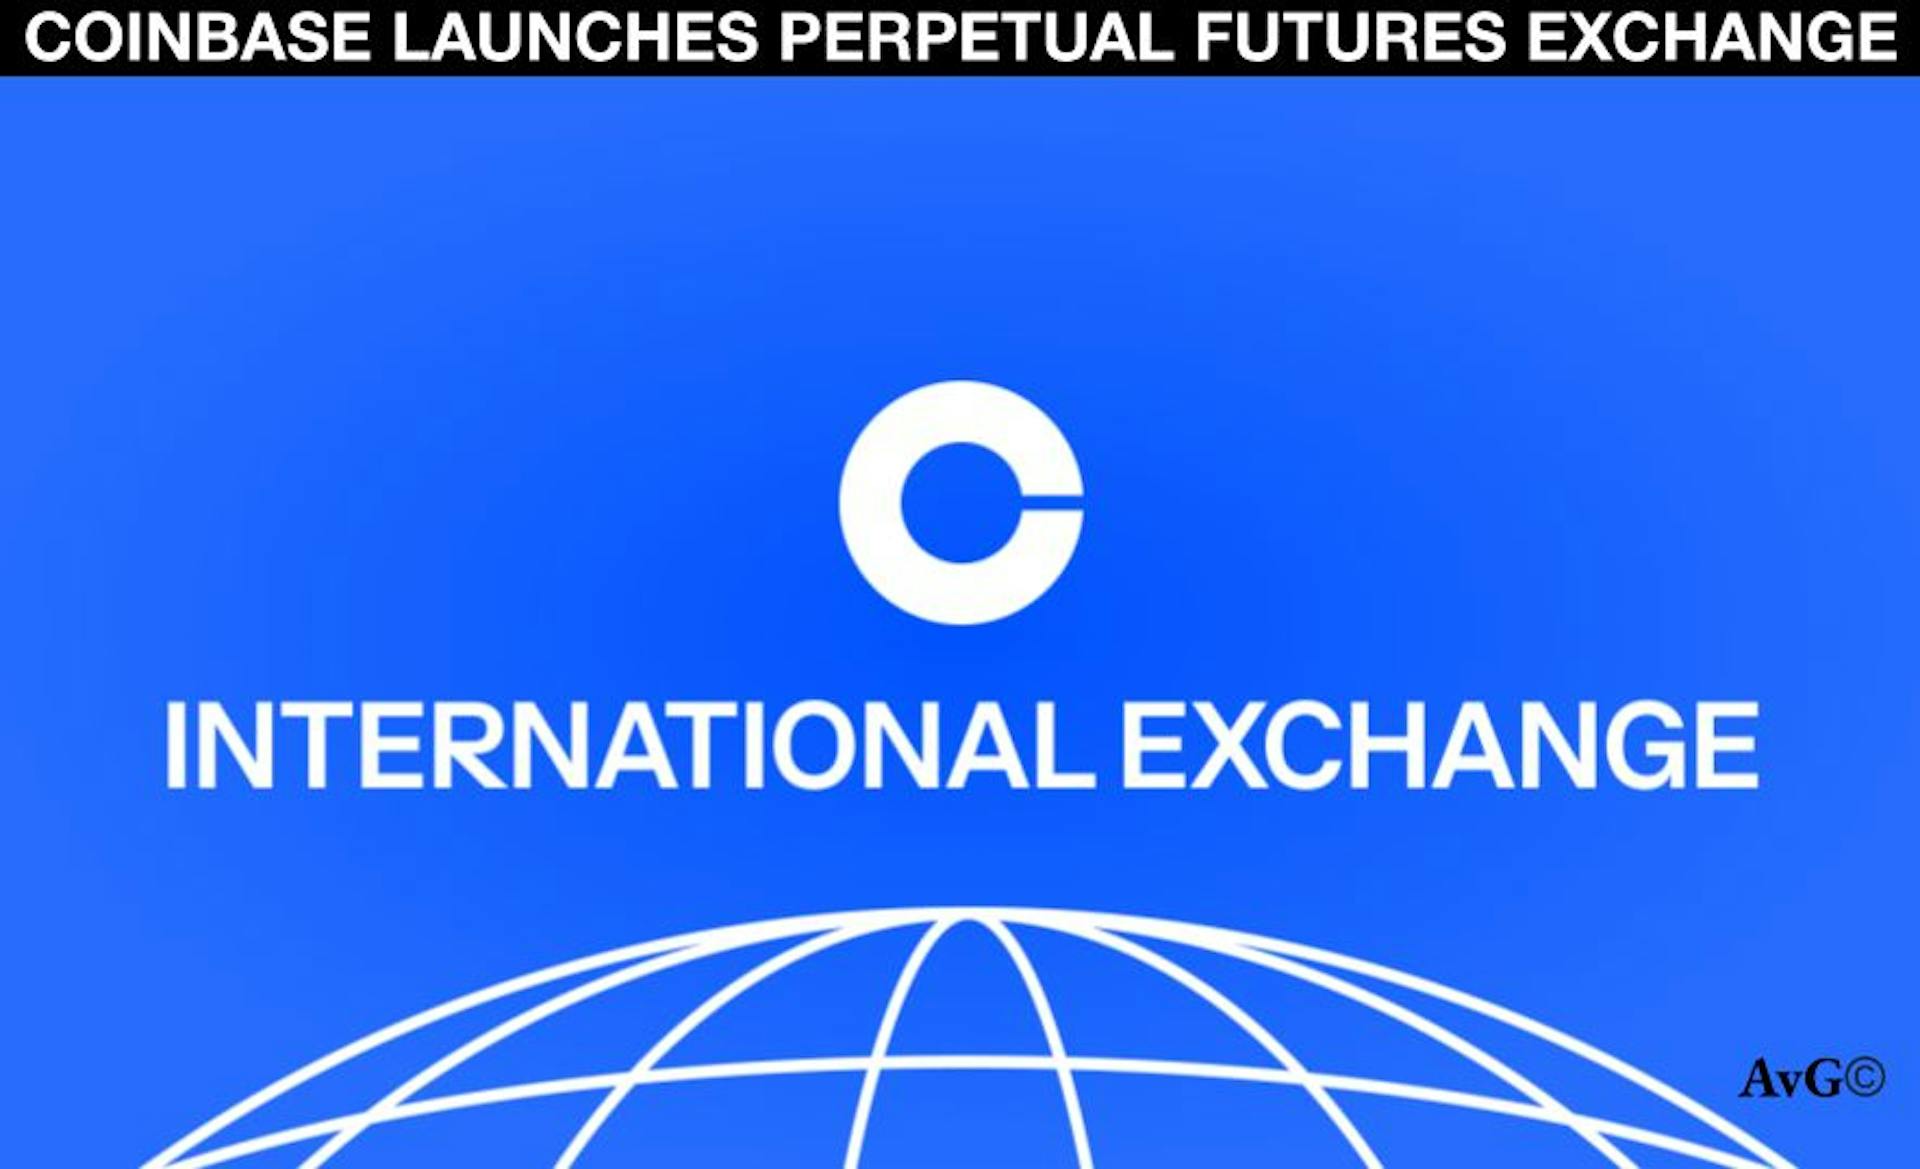 featured image - Coinbase Launches Perpetual Futures Exchange; 5 Years Too Little, Too Late